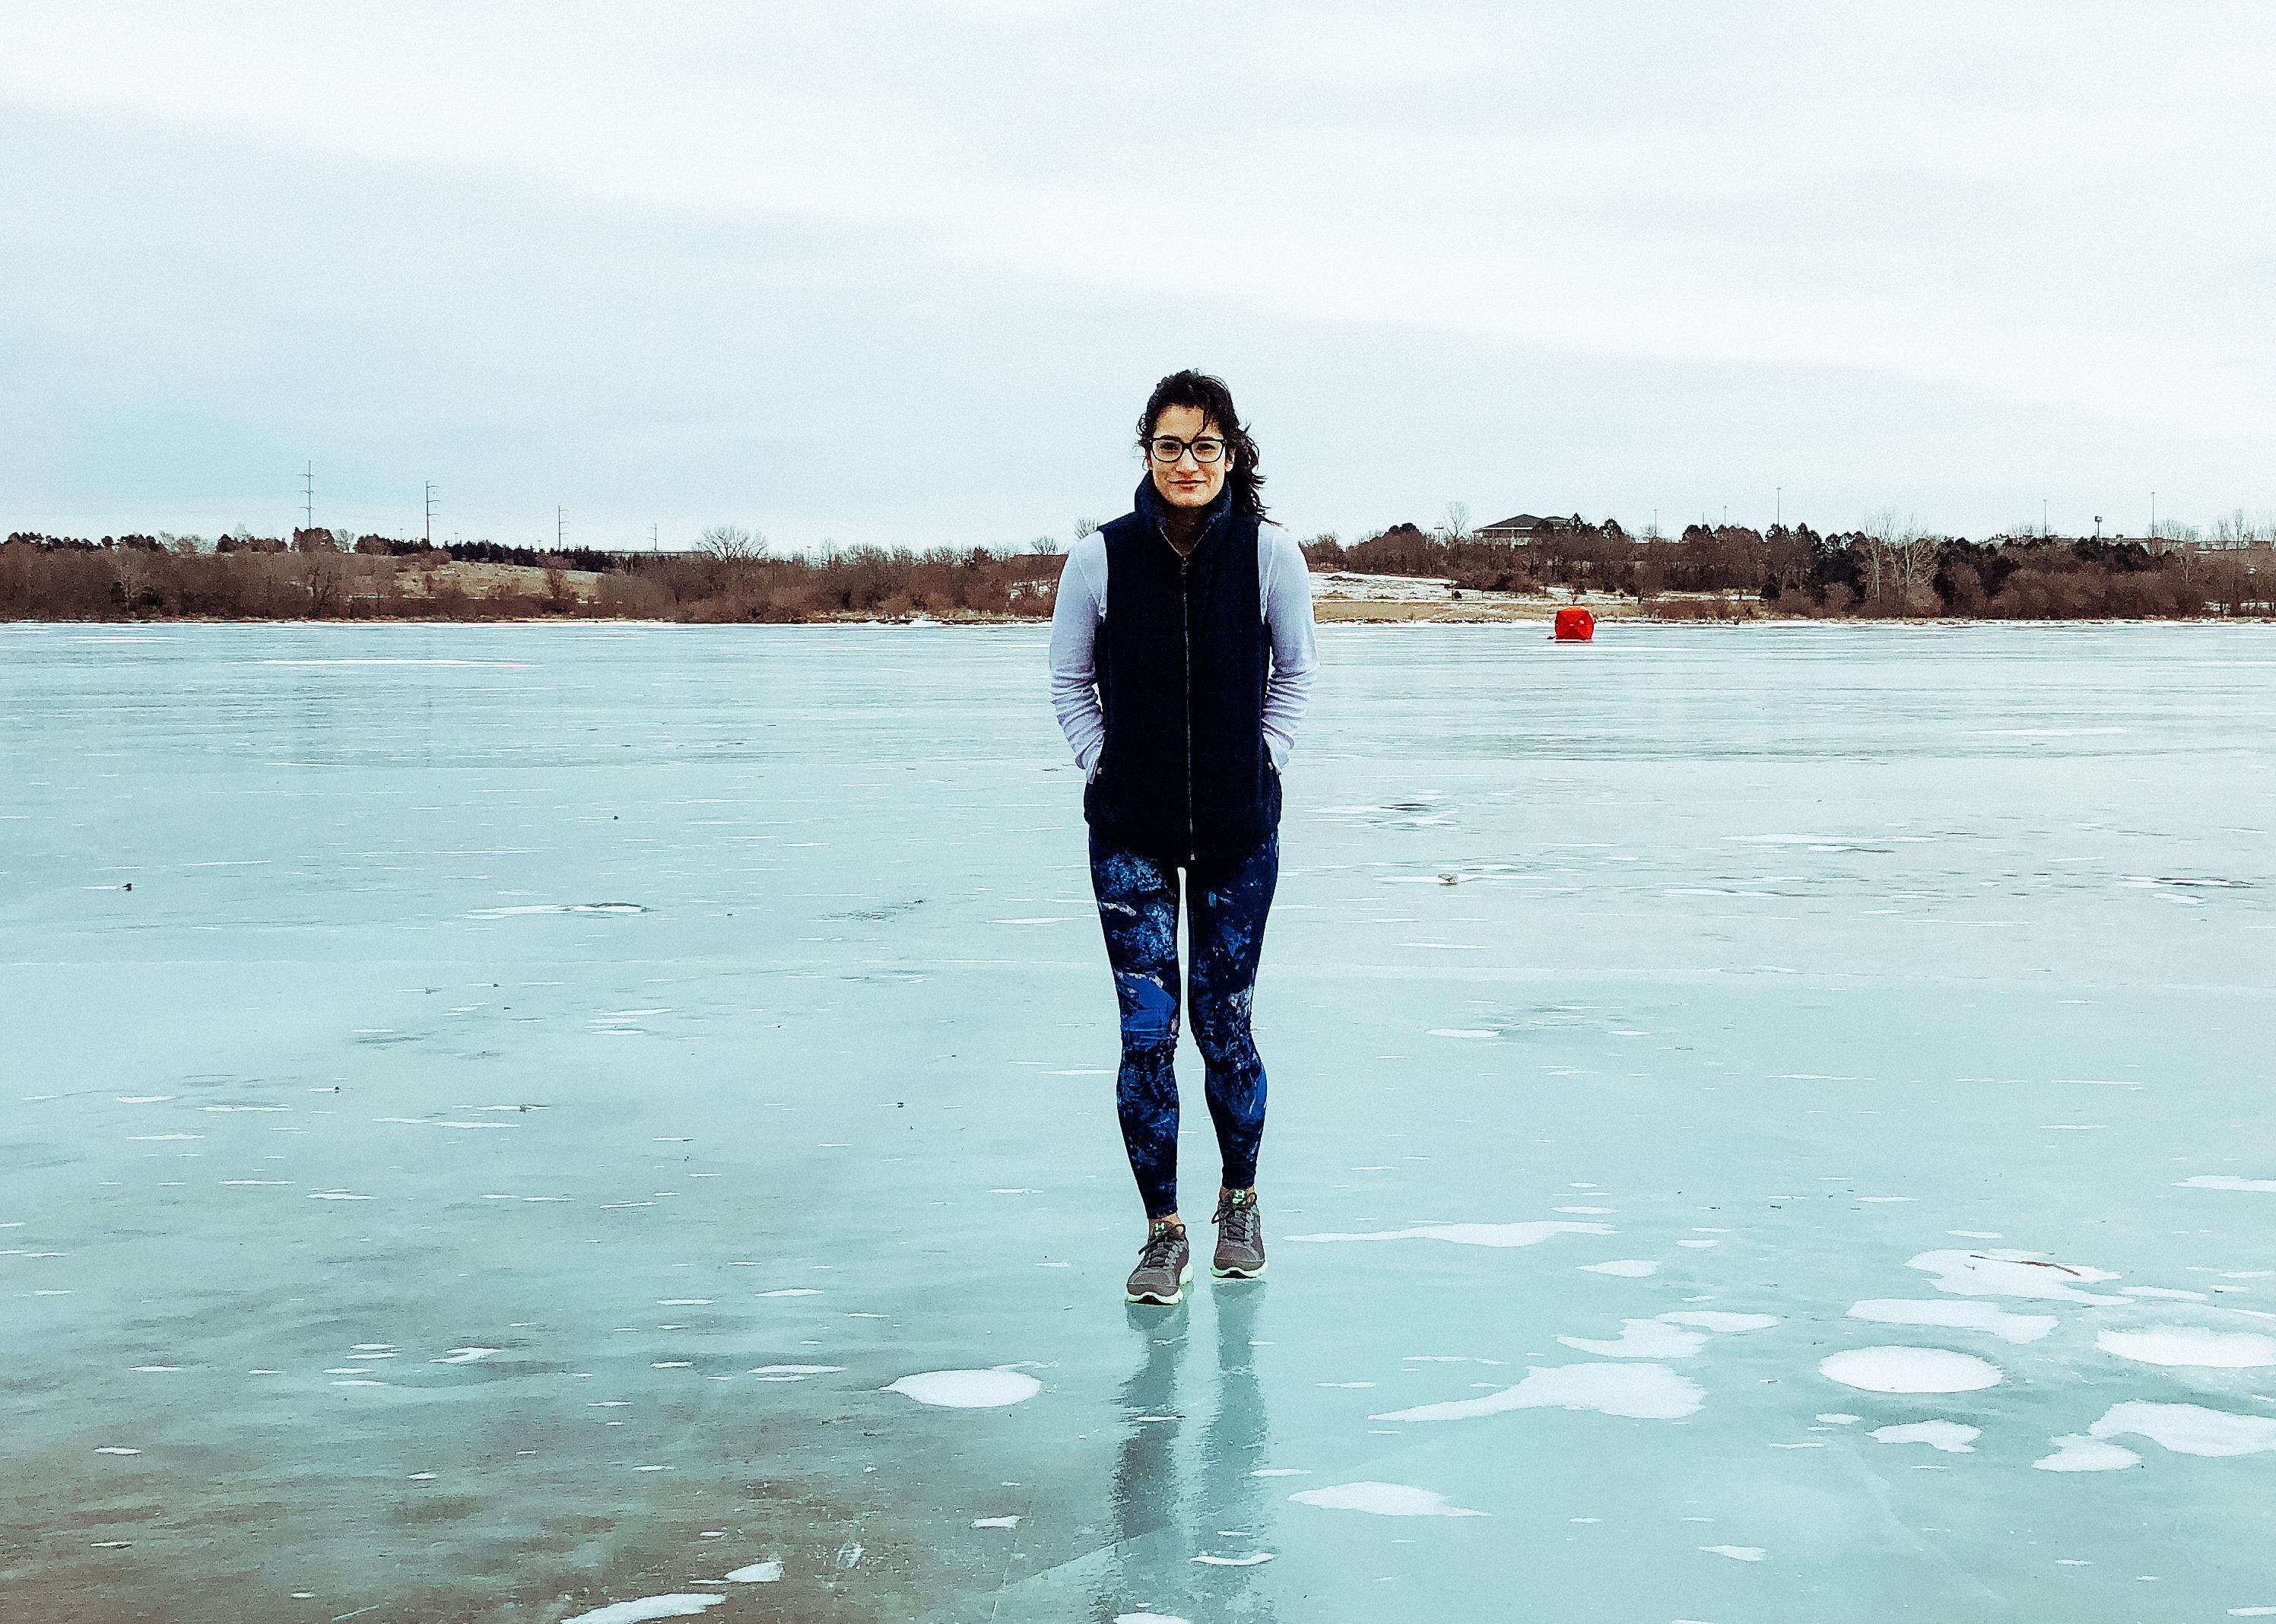 STANDING ON THE FROZEN POND - Ale & Tere | A lifestyle blog